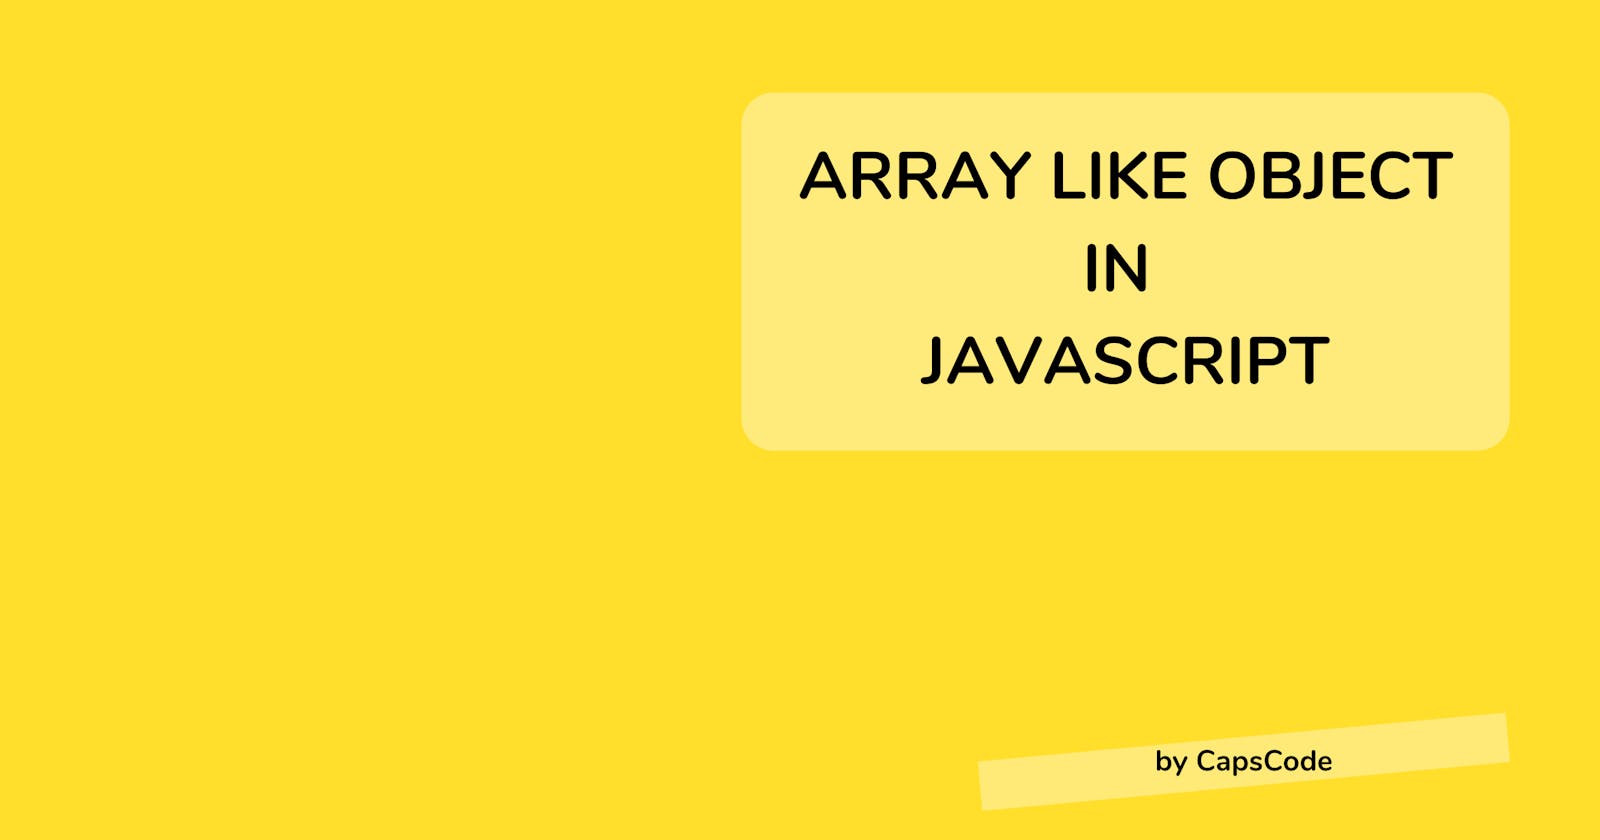 What is Array Like Object in JavaScript